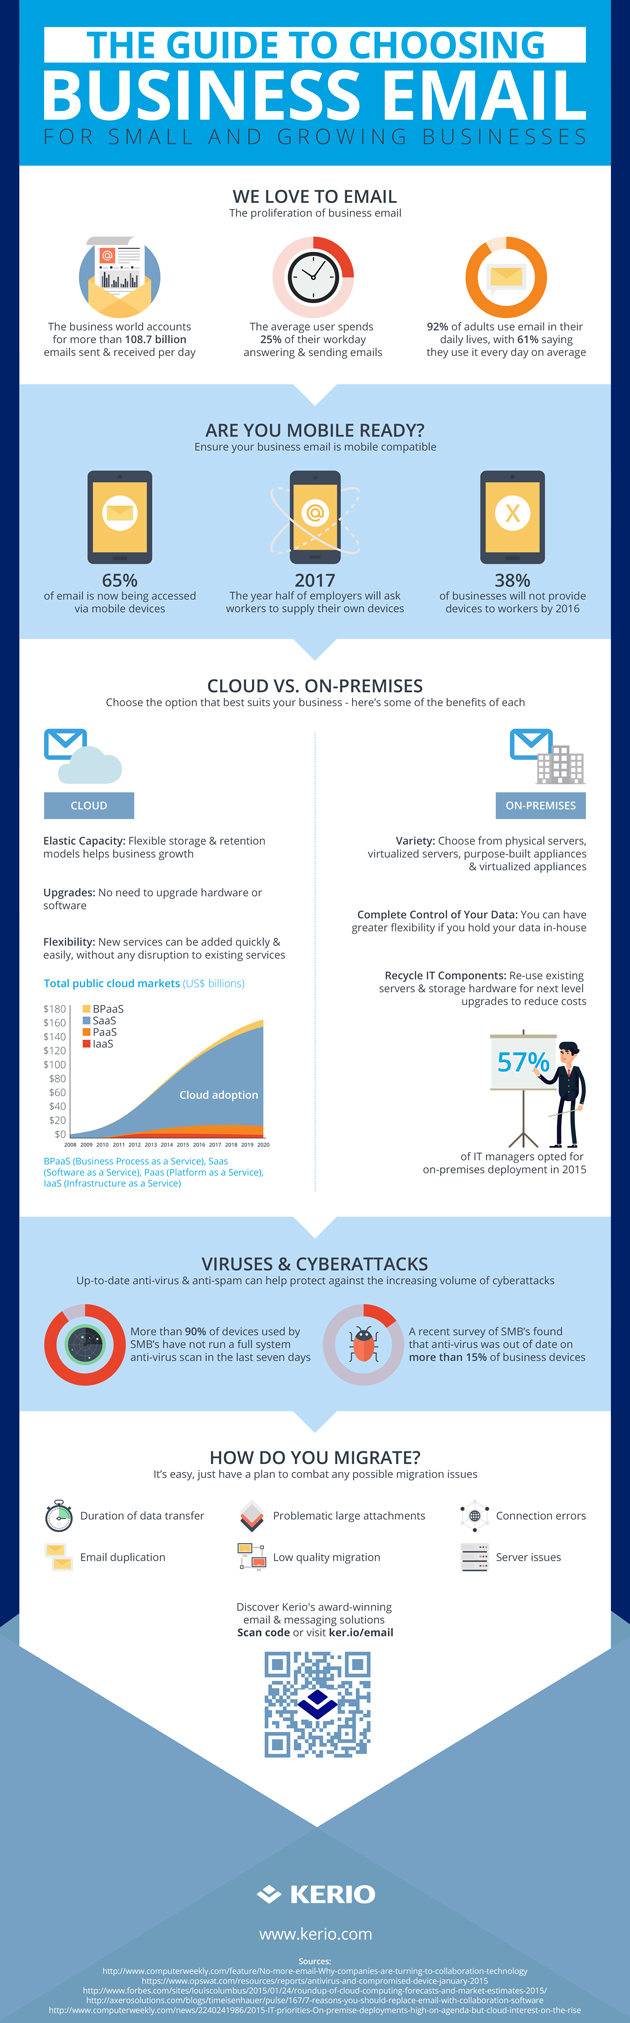 email-infographic-resized